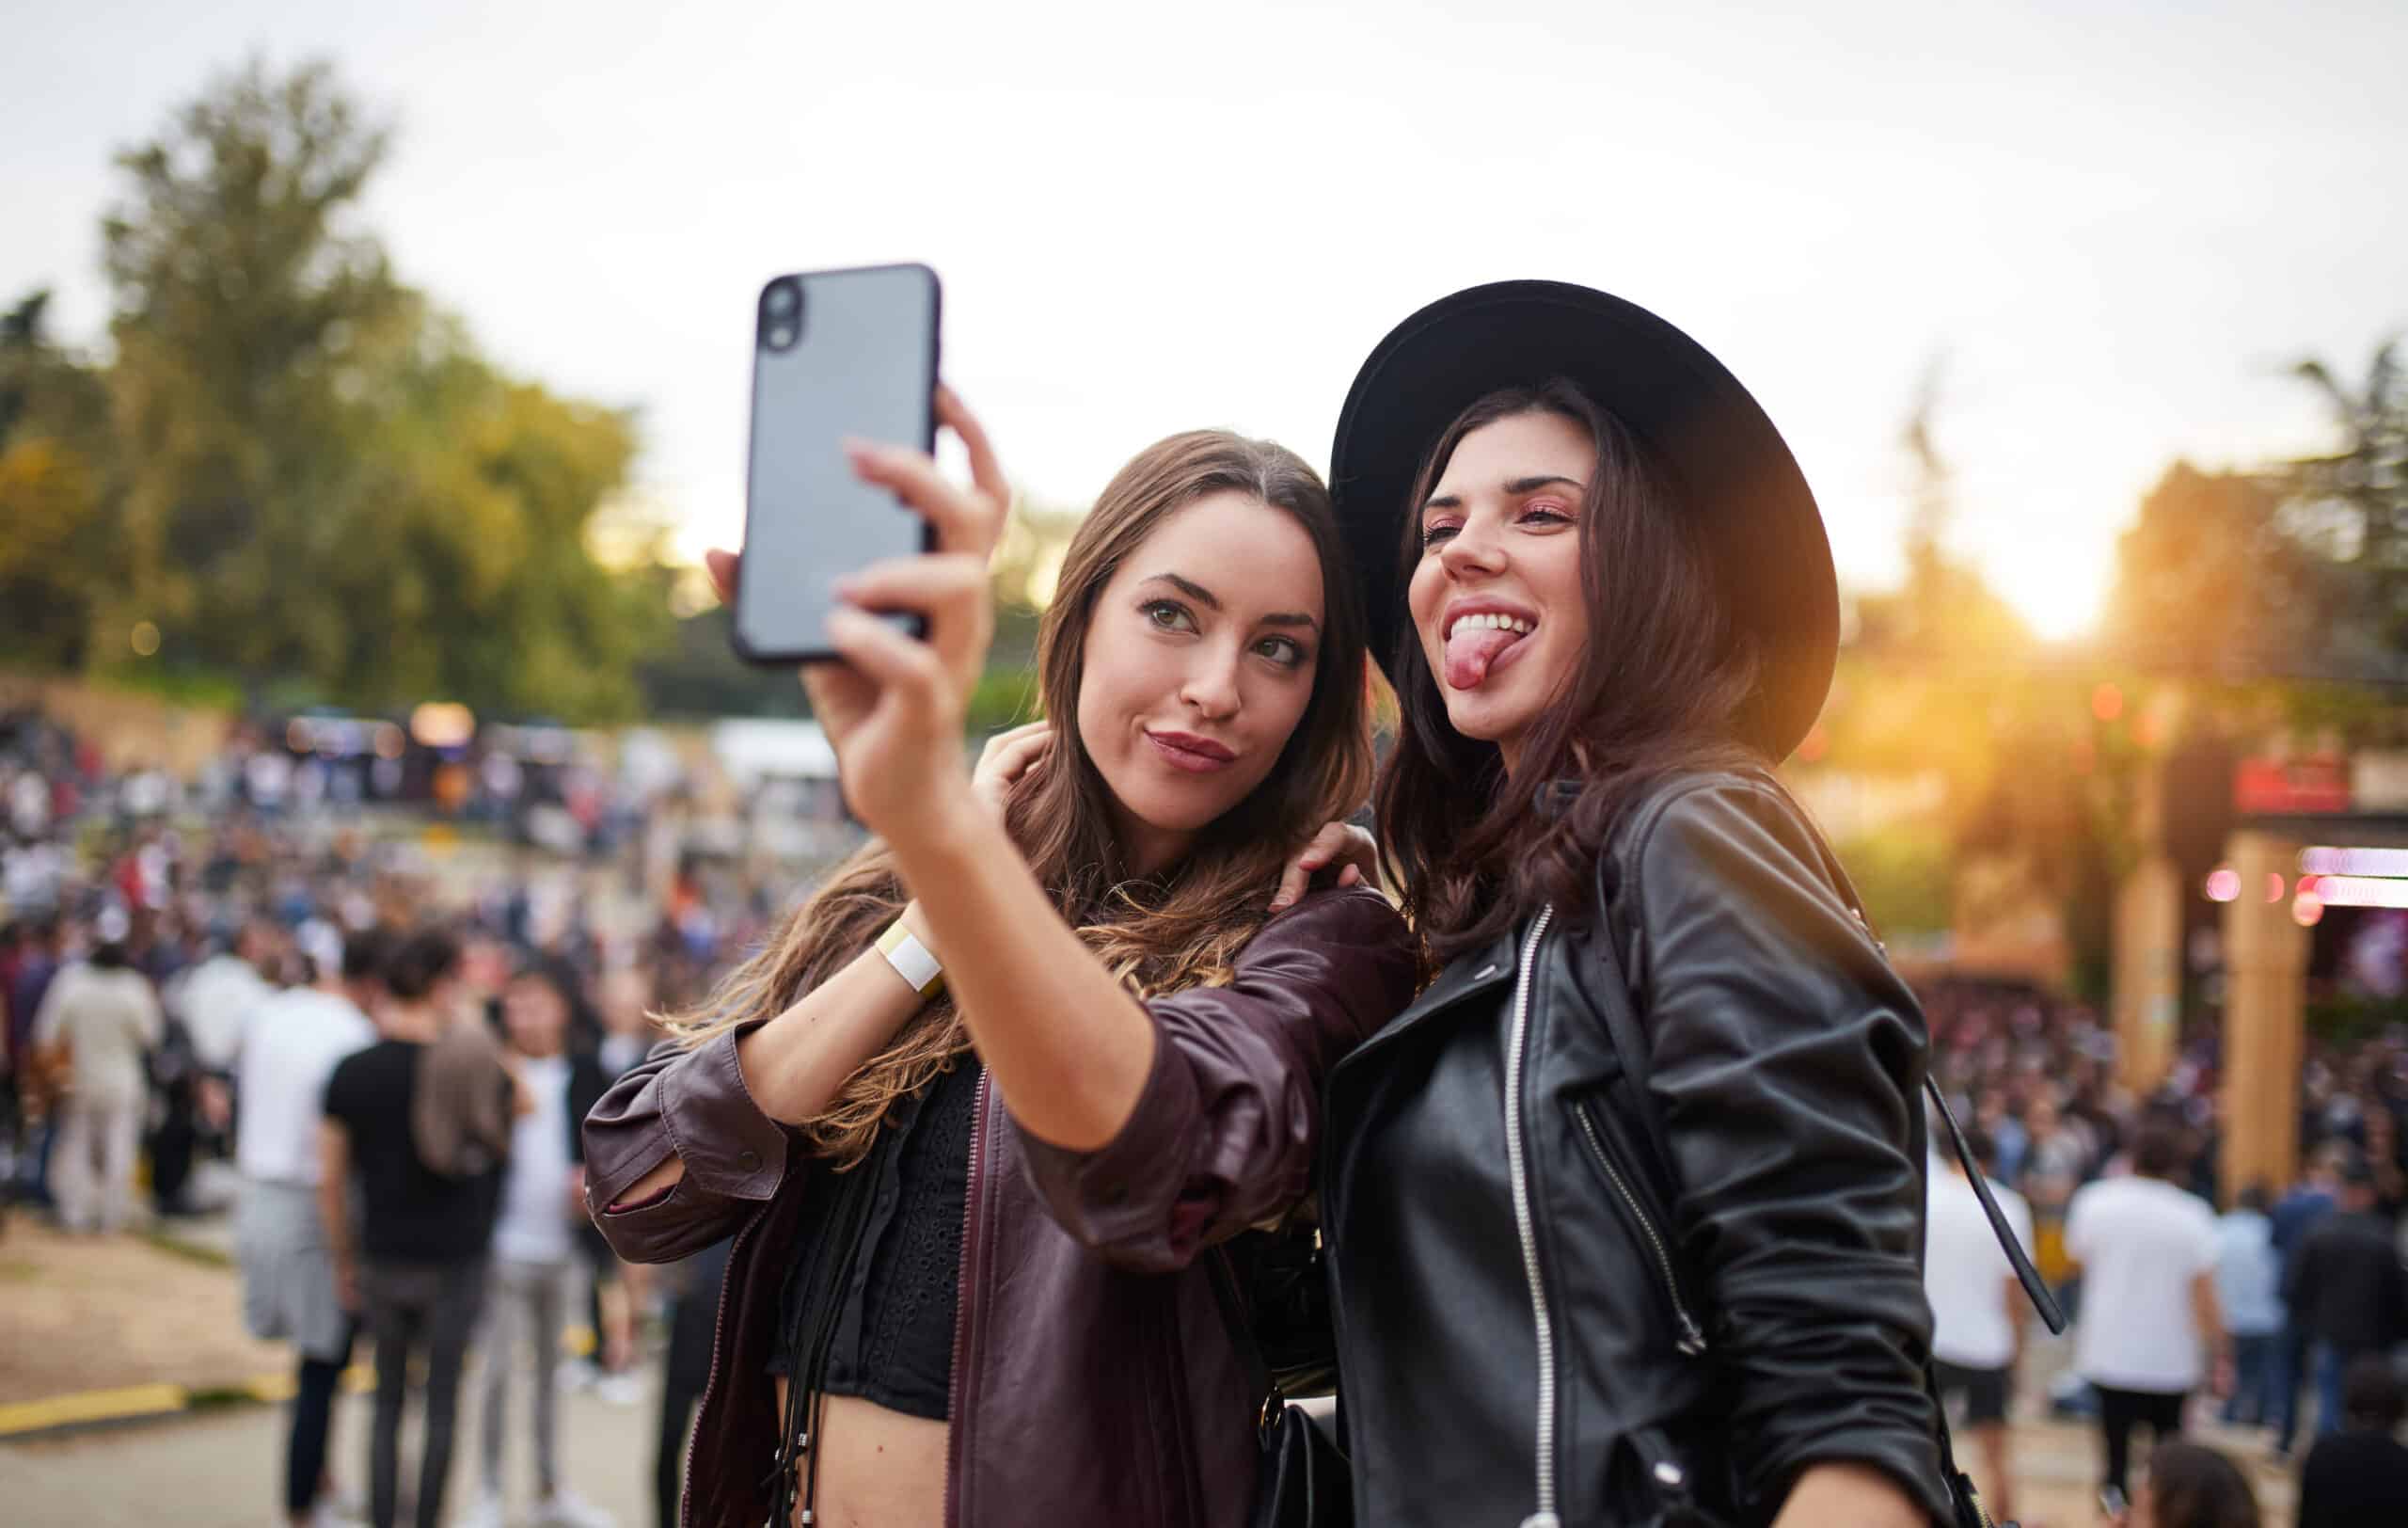 Joyful women taking selfies on smartphone fooling around and sticking out tongues in sunny day